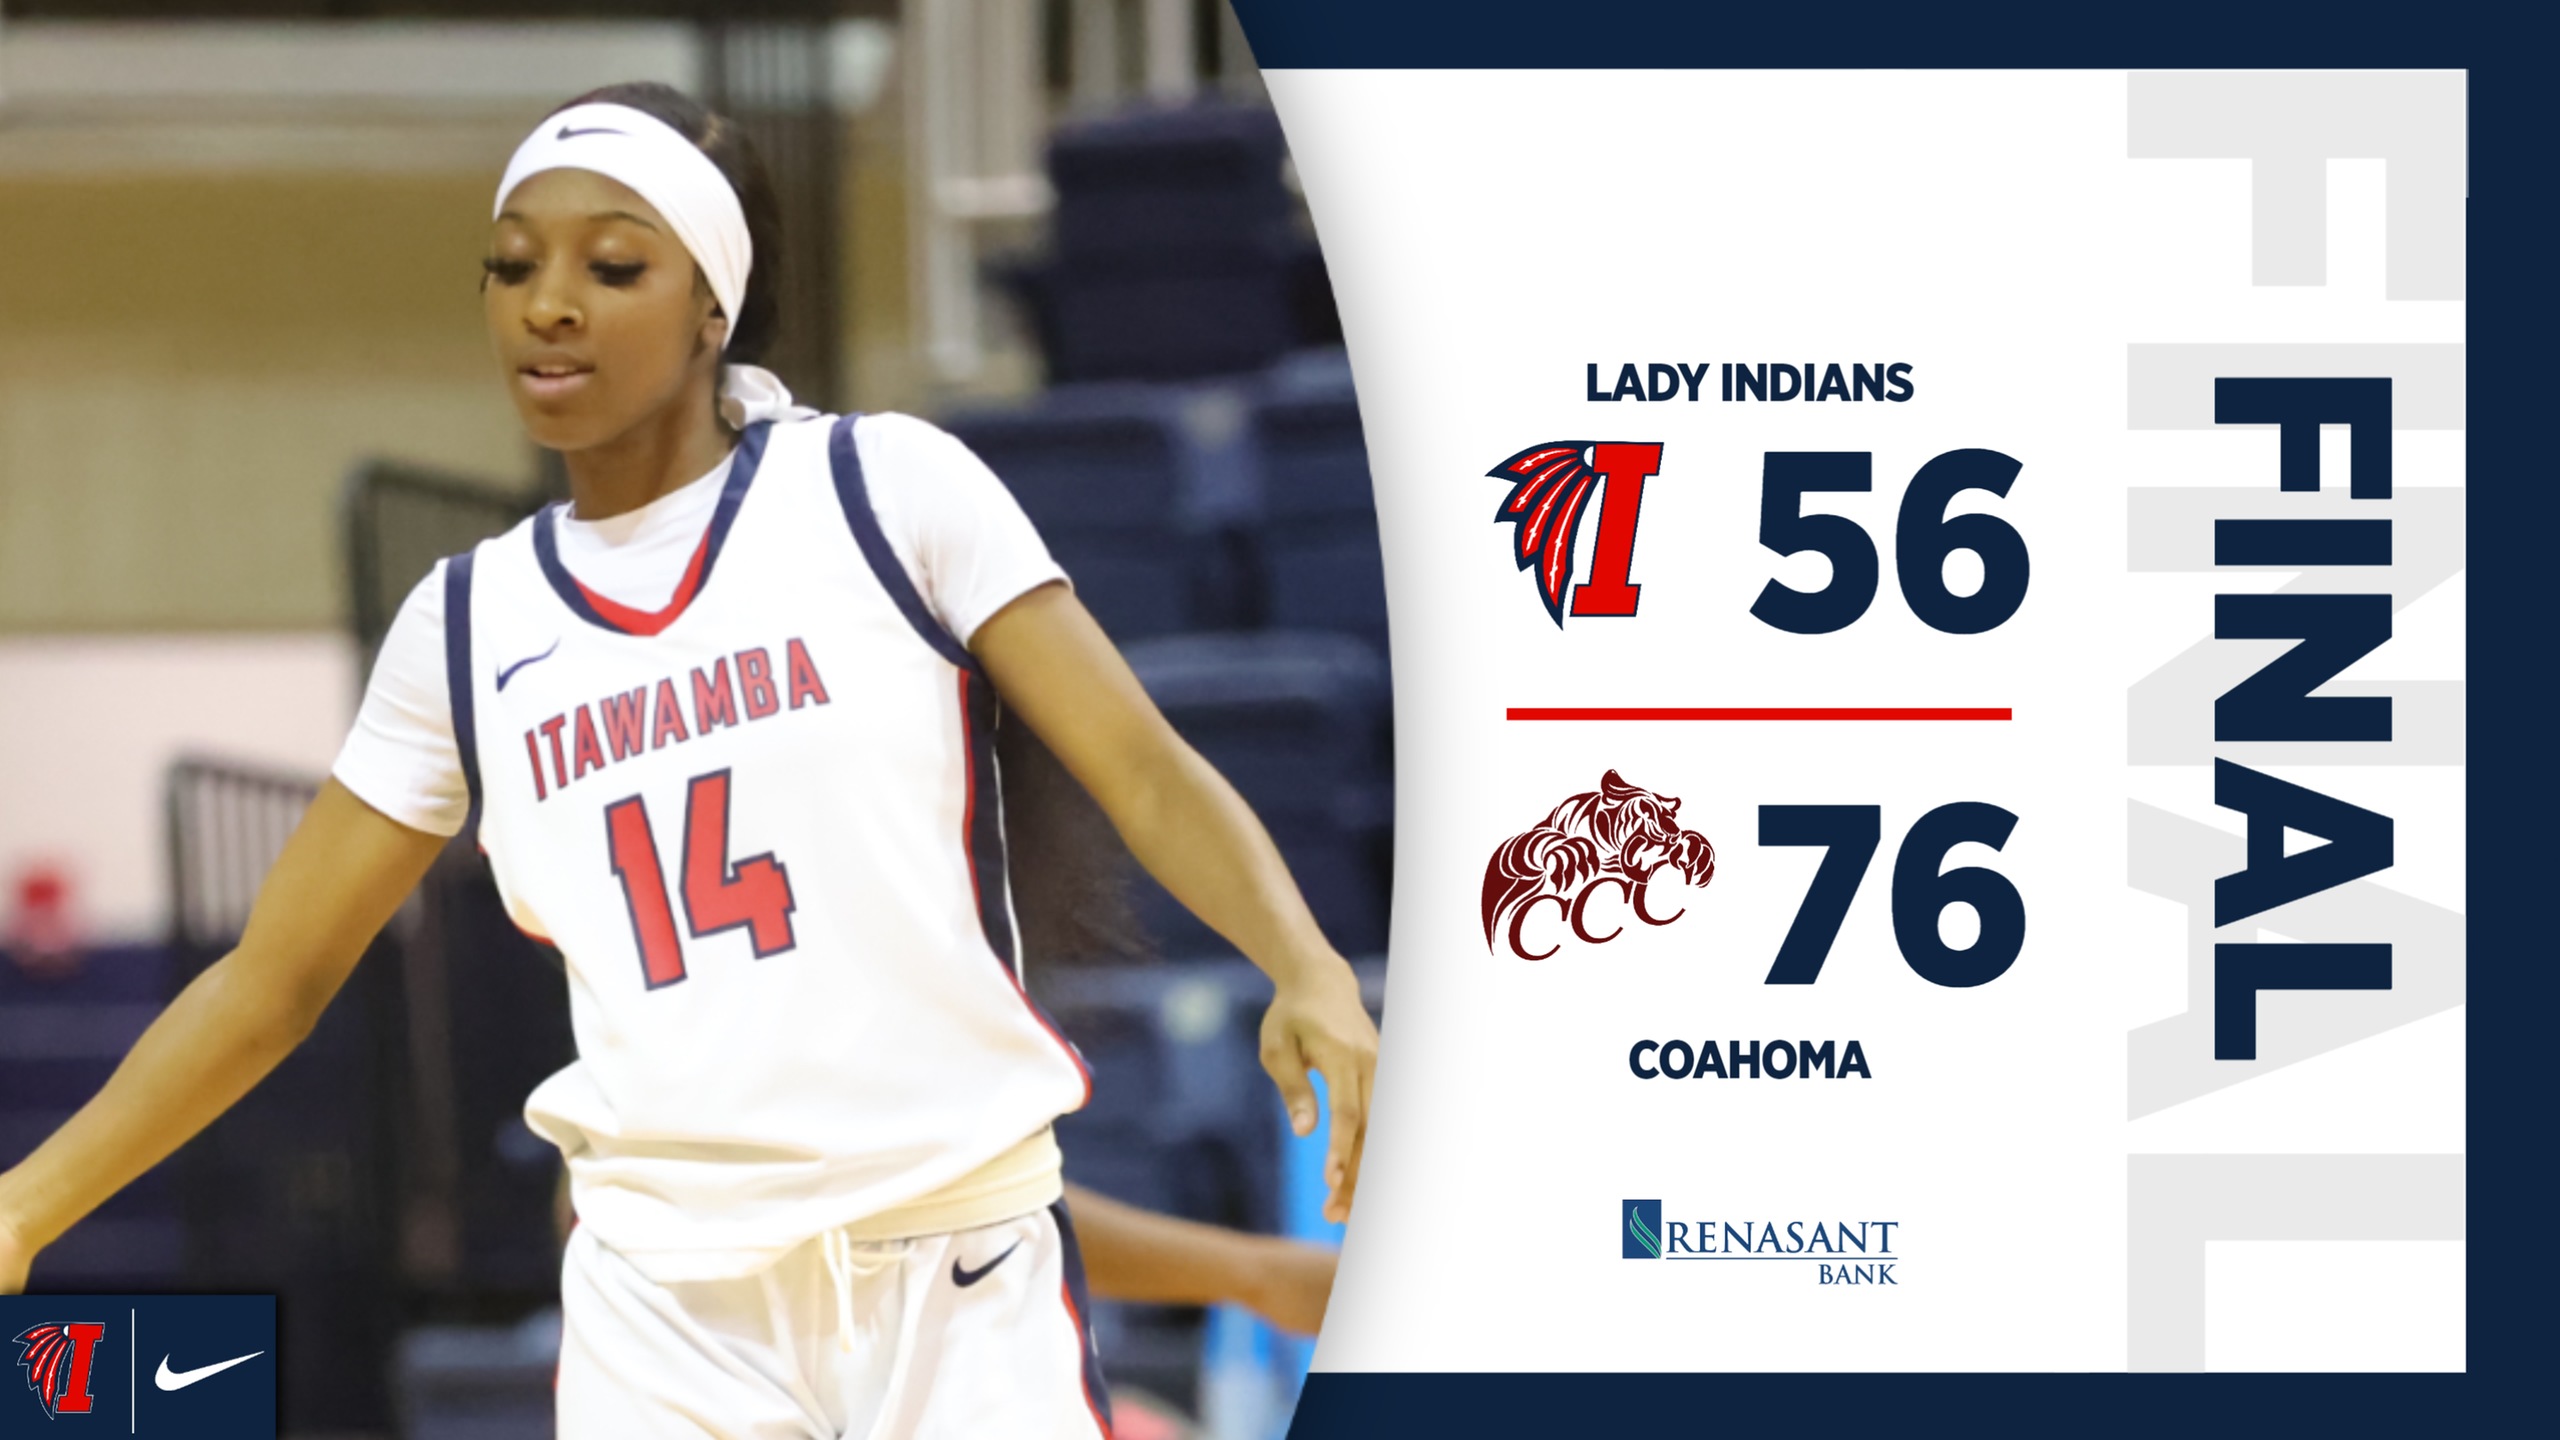 Lady Indians struggle offensively in 76-56 loss at Coahoma